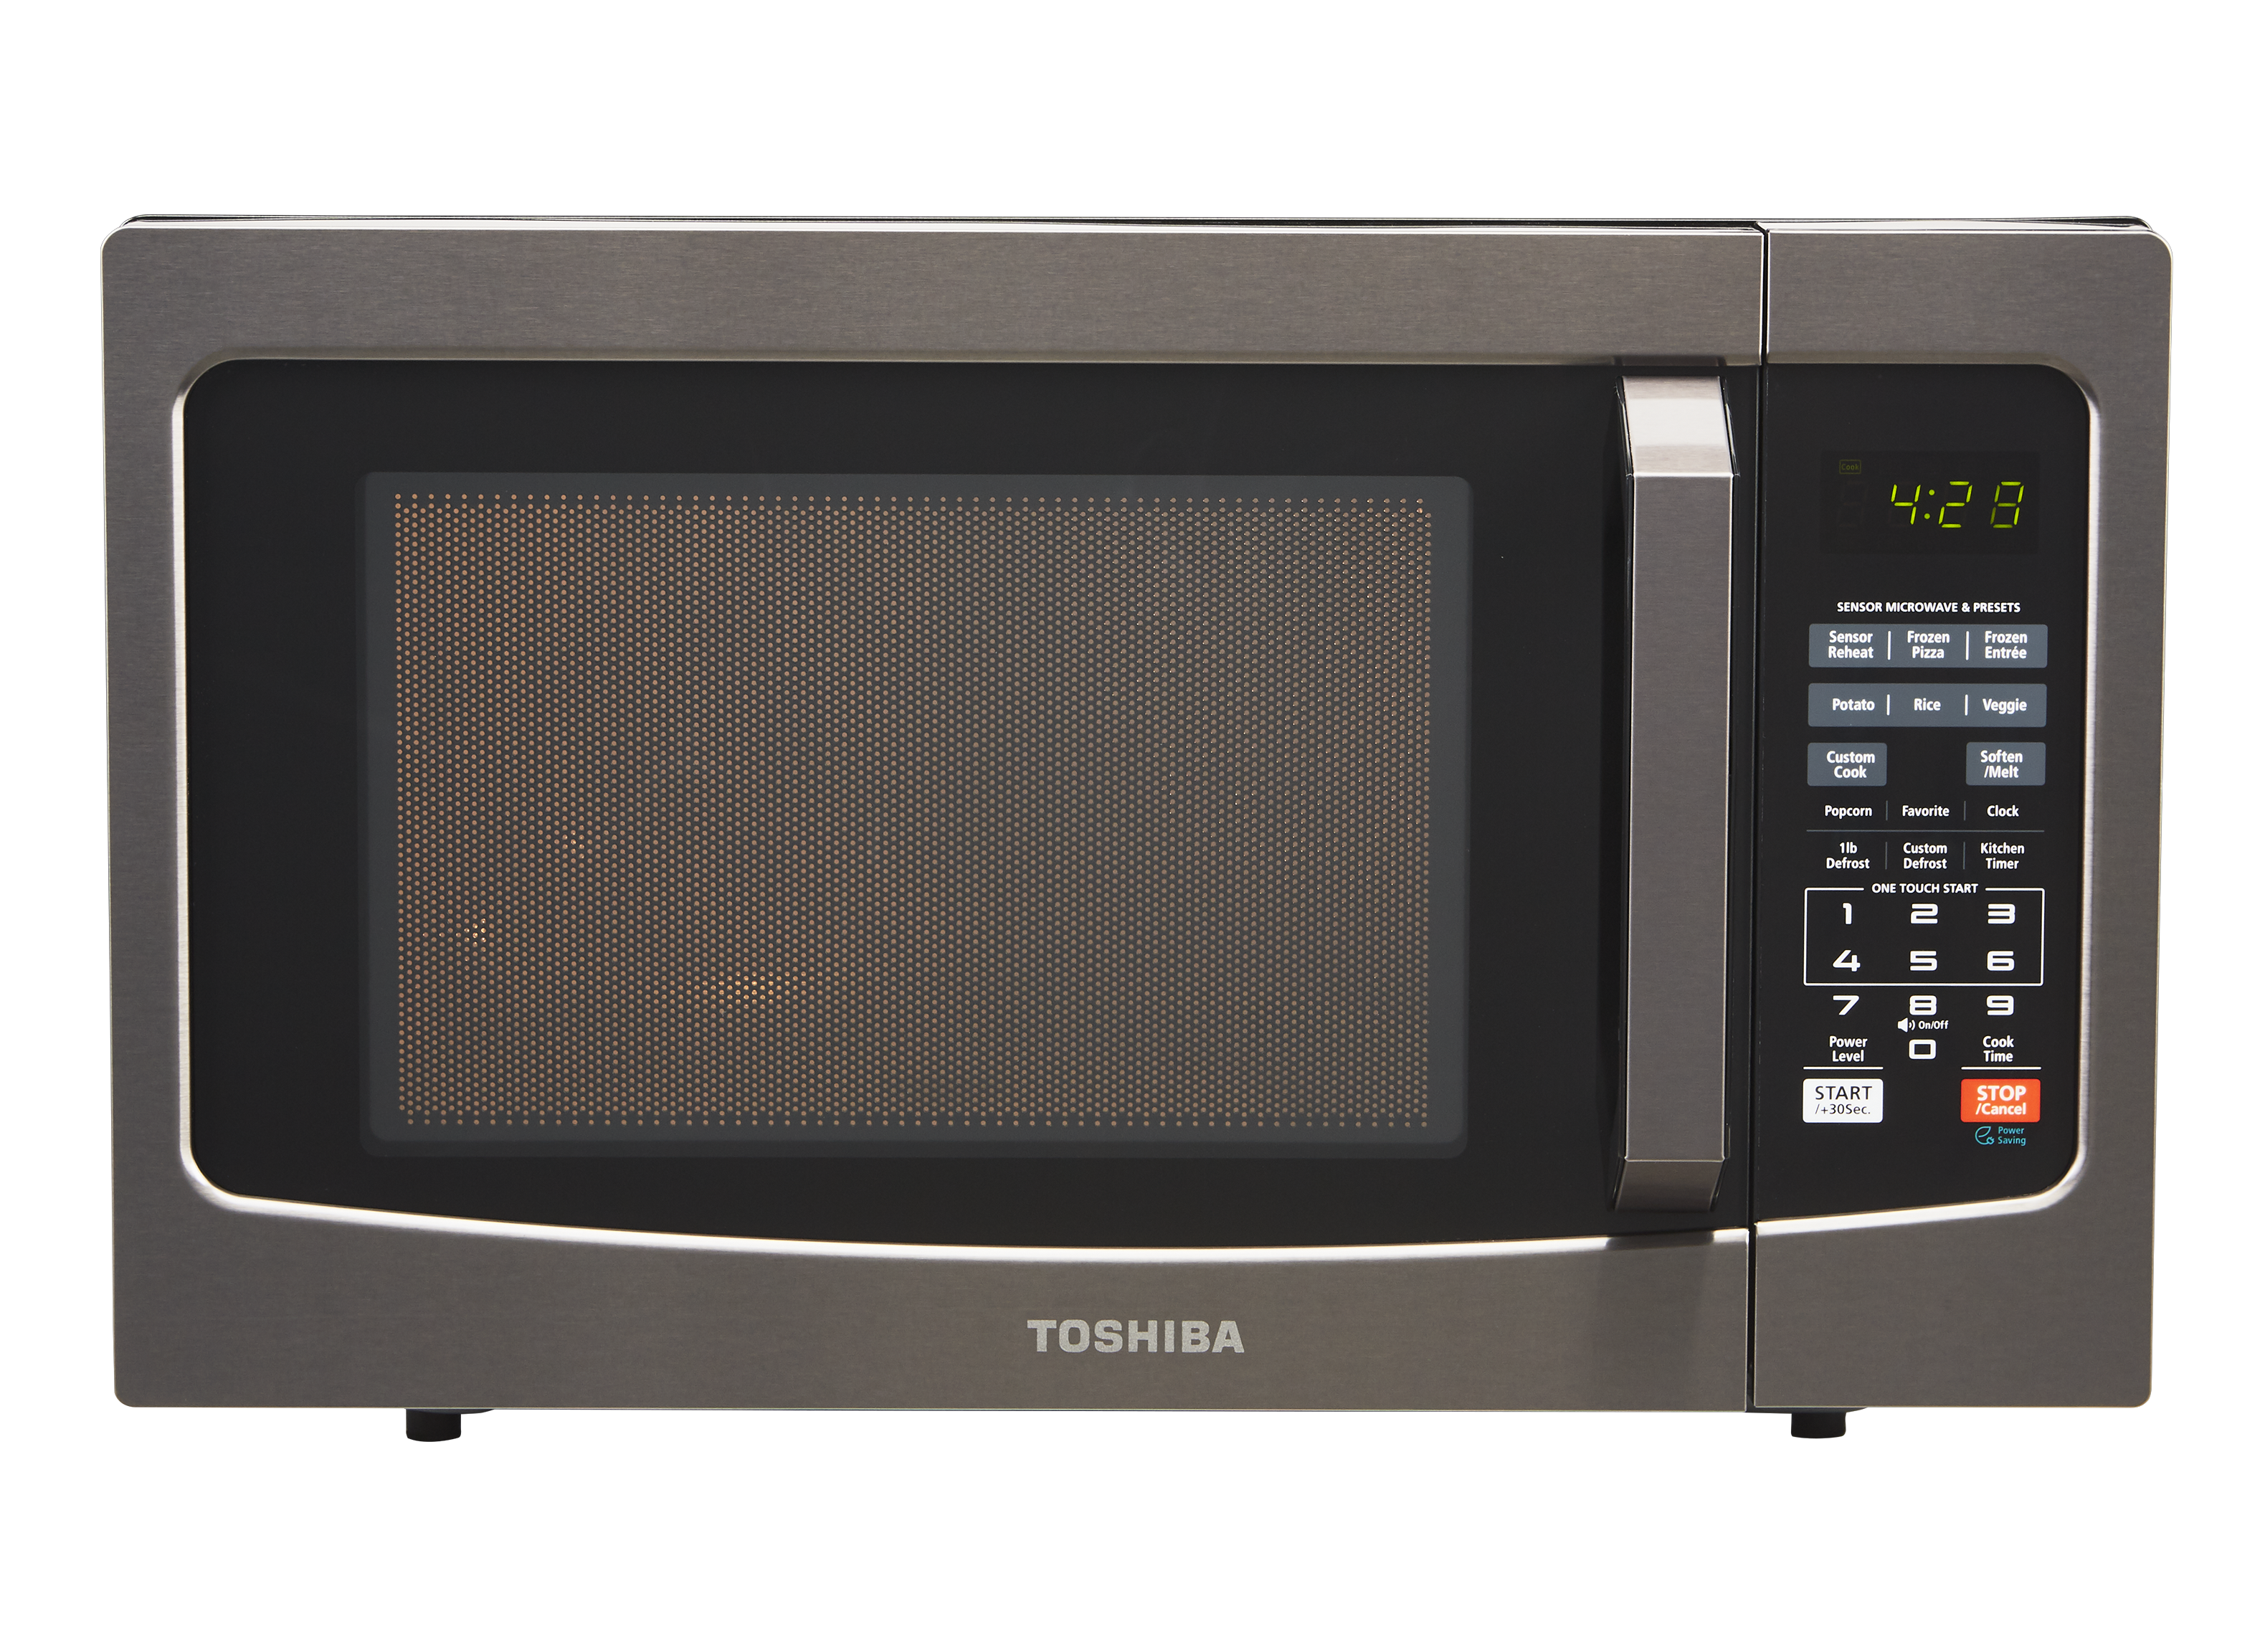 https://crdms.images.consumerreports.org/prod/products/cr/models/398217-midsized-countertop-microwaves-toshiba-em131a5c-bs-10005234.png